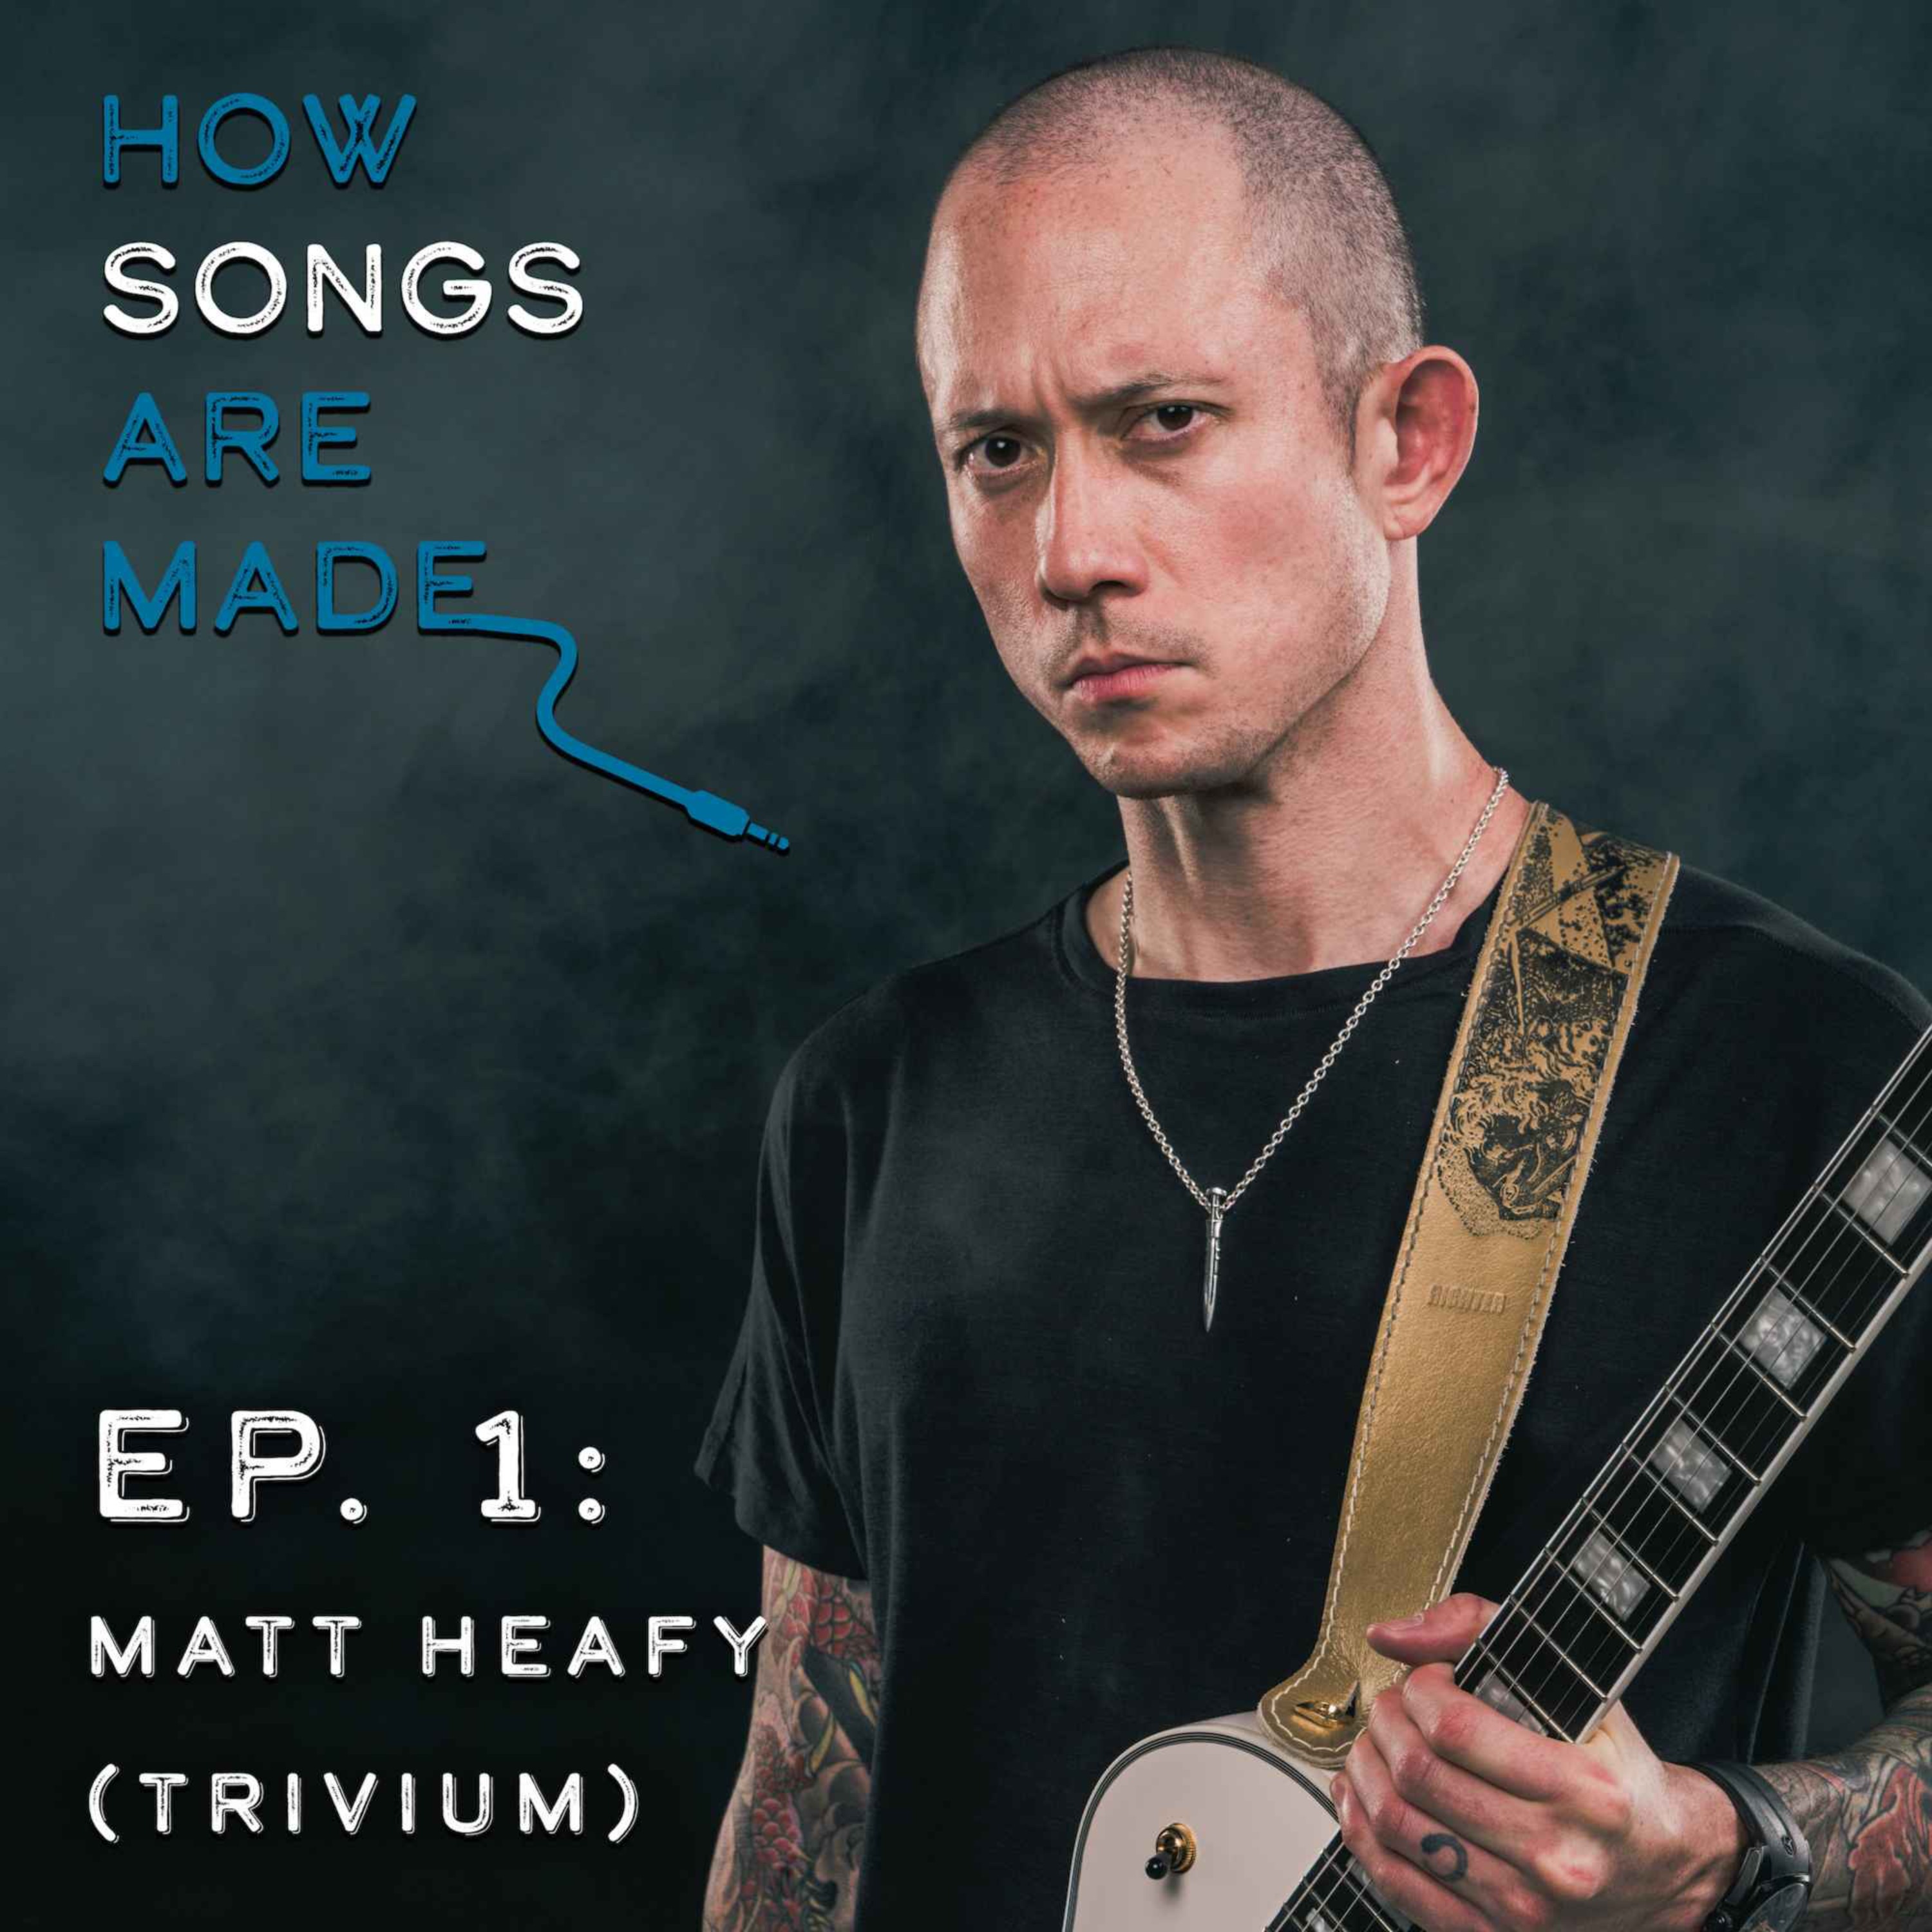 Matt Heafy (Trivium) - How We Wrote “In The Court Of The Dragon”